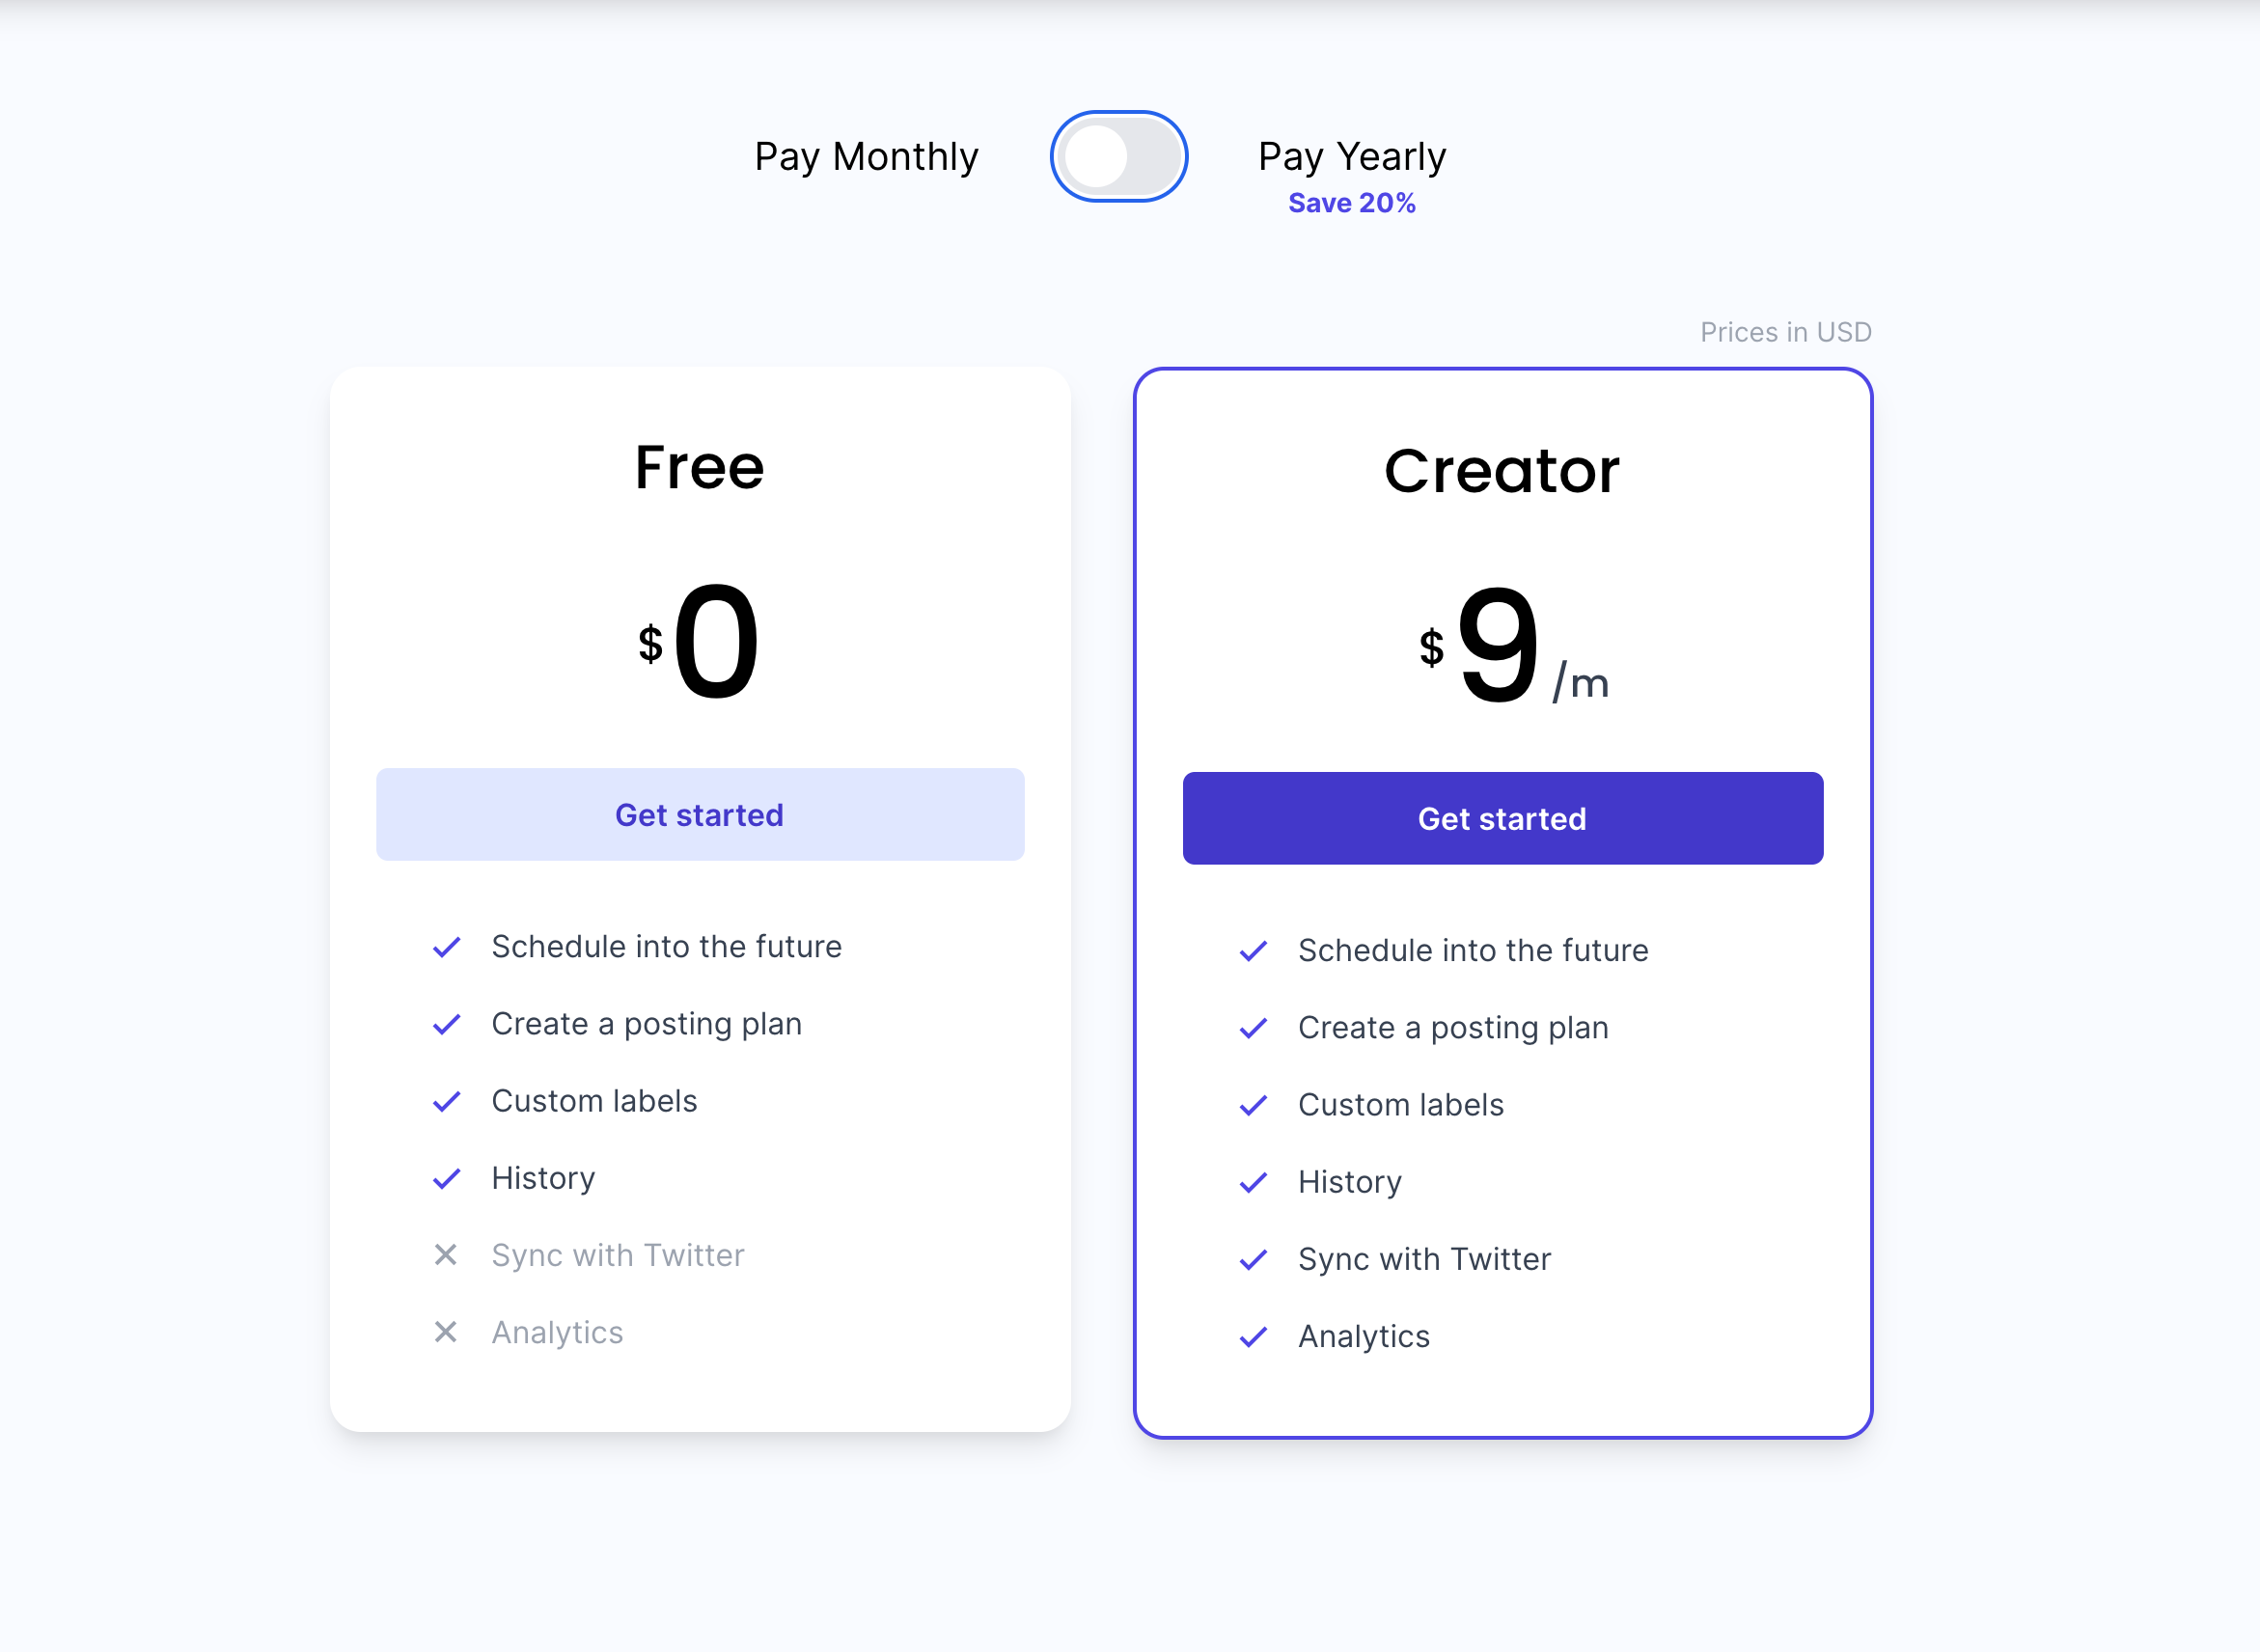 The new pricing page for FeedHive with the Free and Creator tiers with the updated pricing models